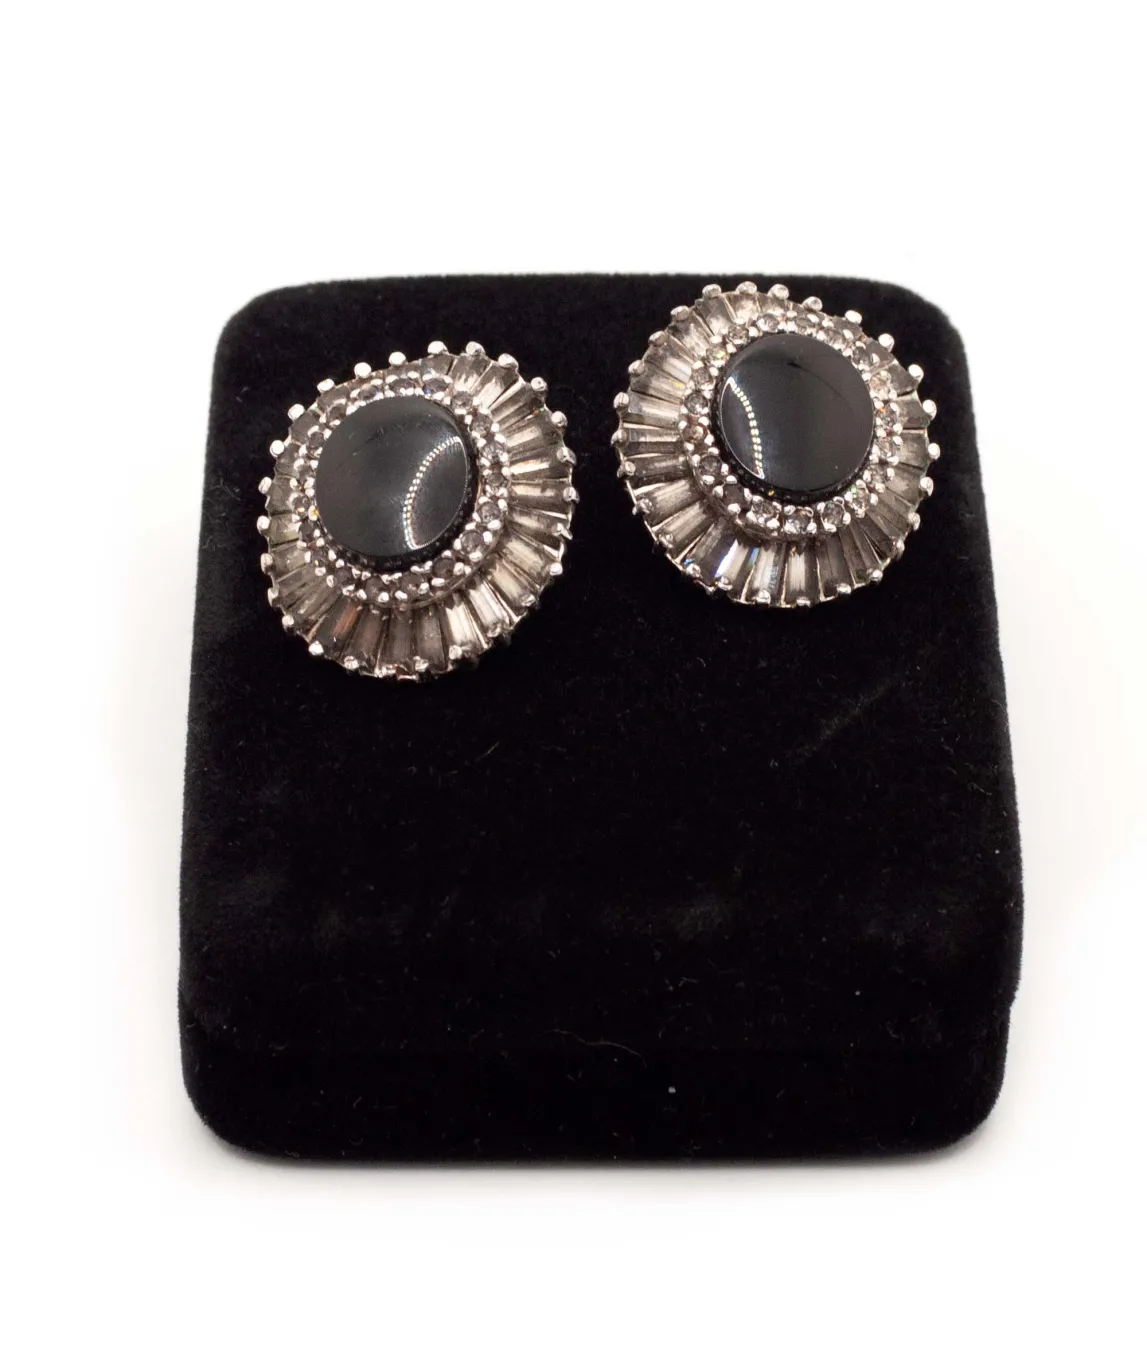 Vintage 1980s Panetta earrings with onyx and baguette crystals on black box